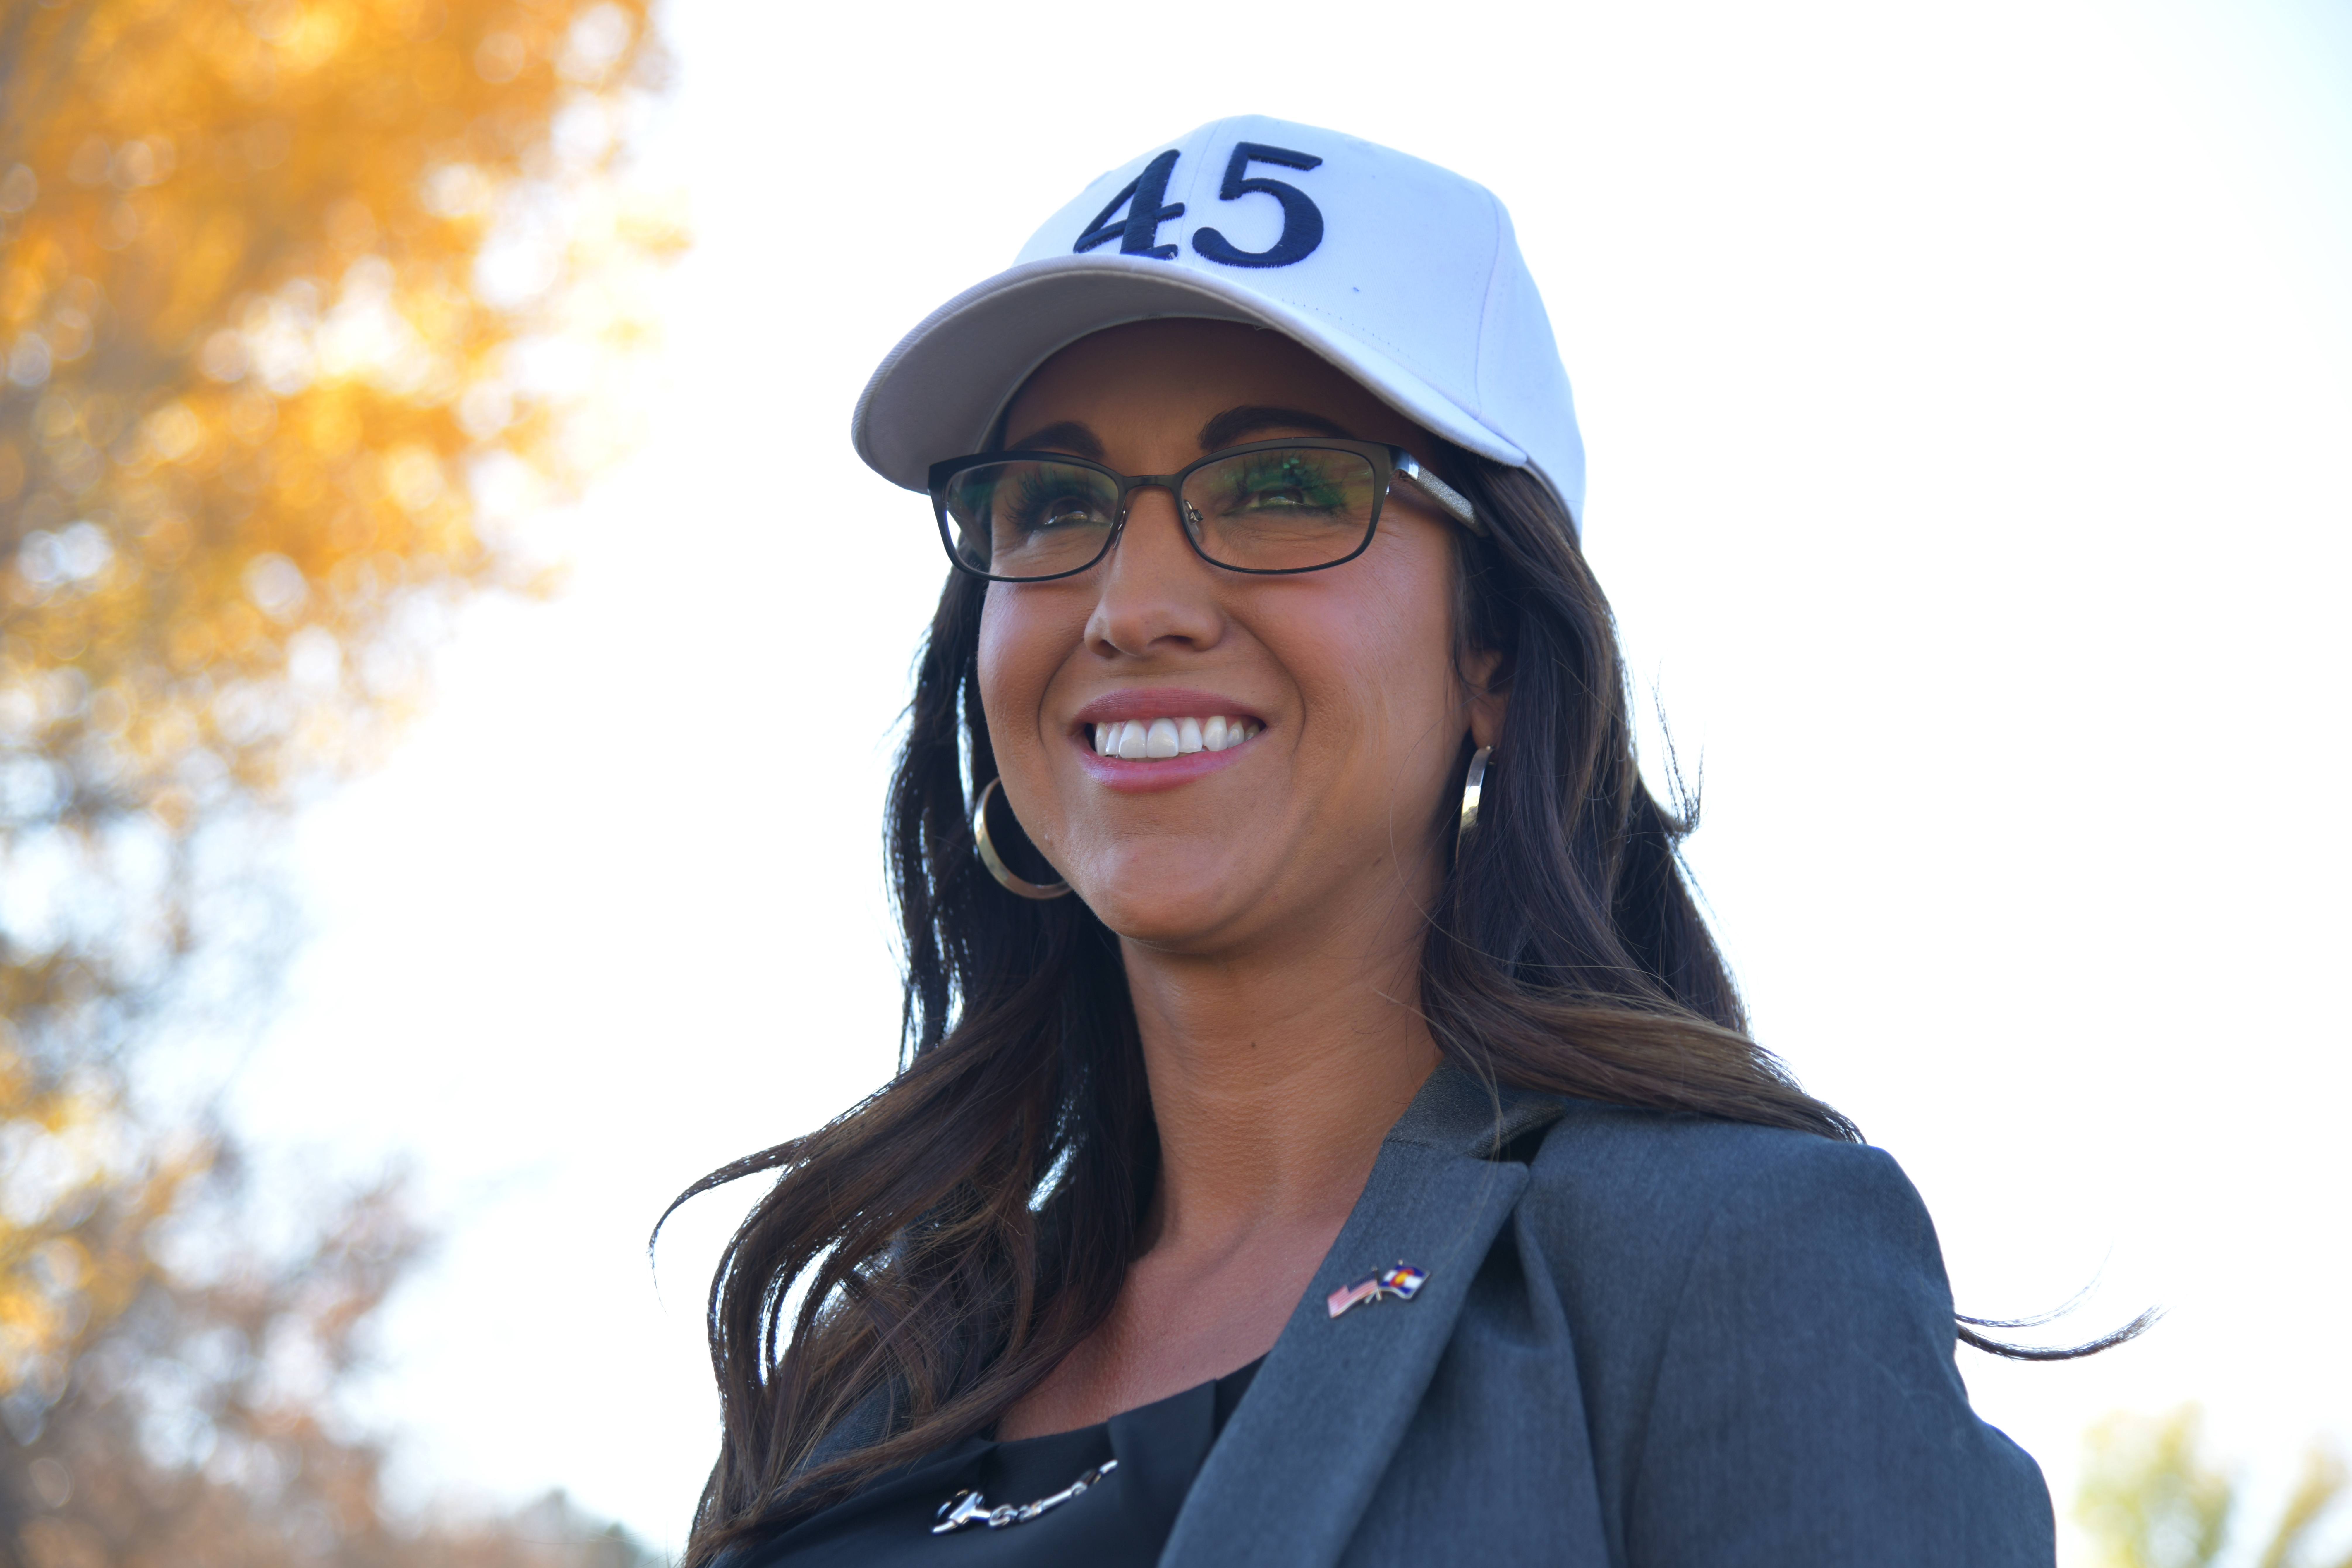 Lauren Boebert, Republican nominee for Colorado's 3rd congressional district, poses for the portrait at Terrell Park in Collbran, Colorado on Oct. 22, 2020.